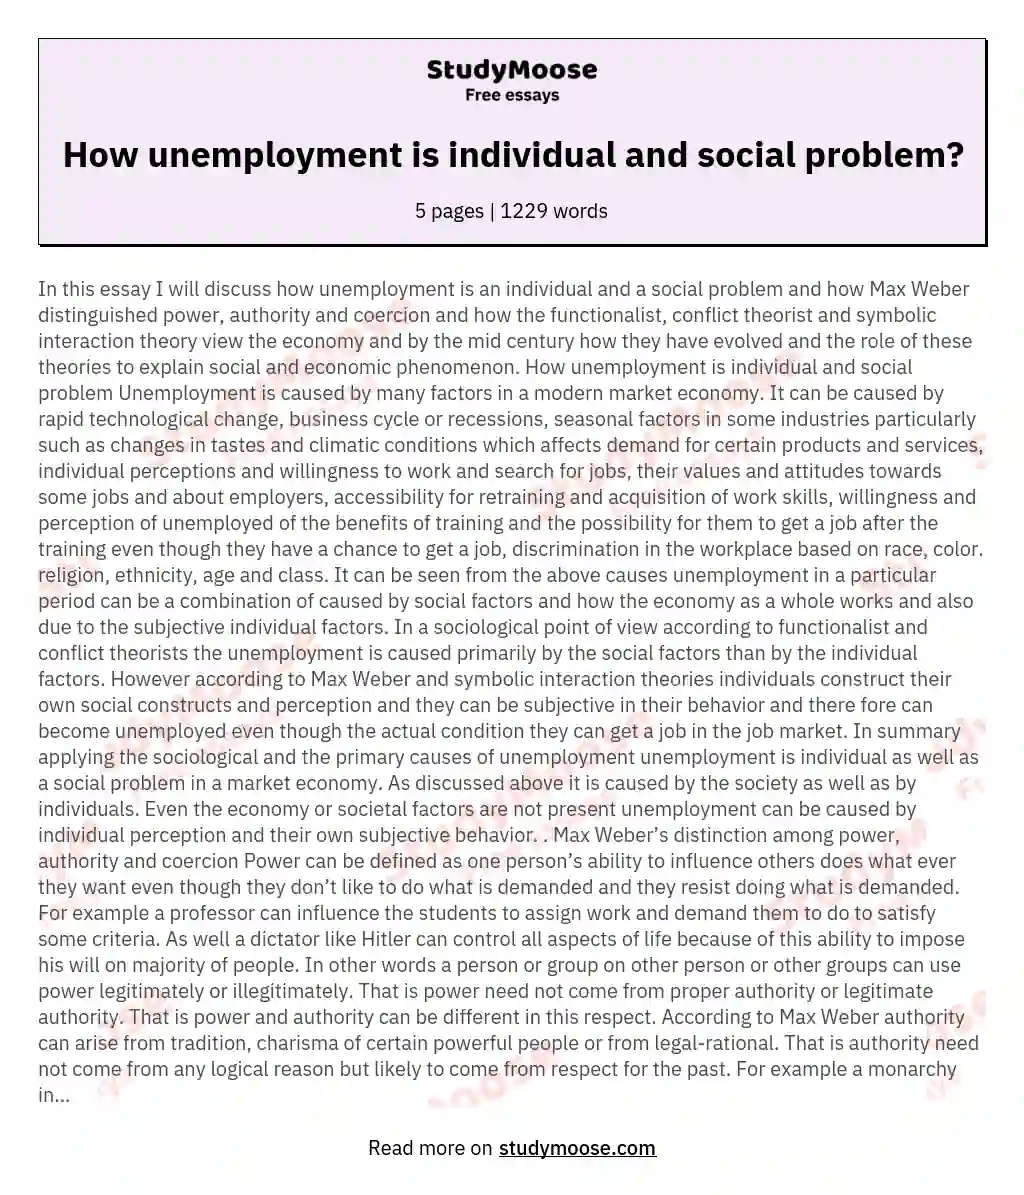 How unemployment is individual and social problem? essay